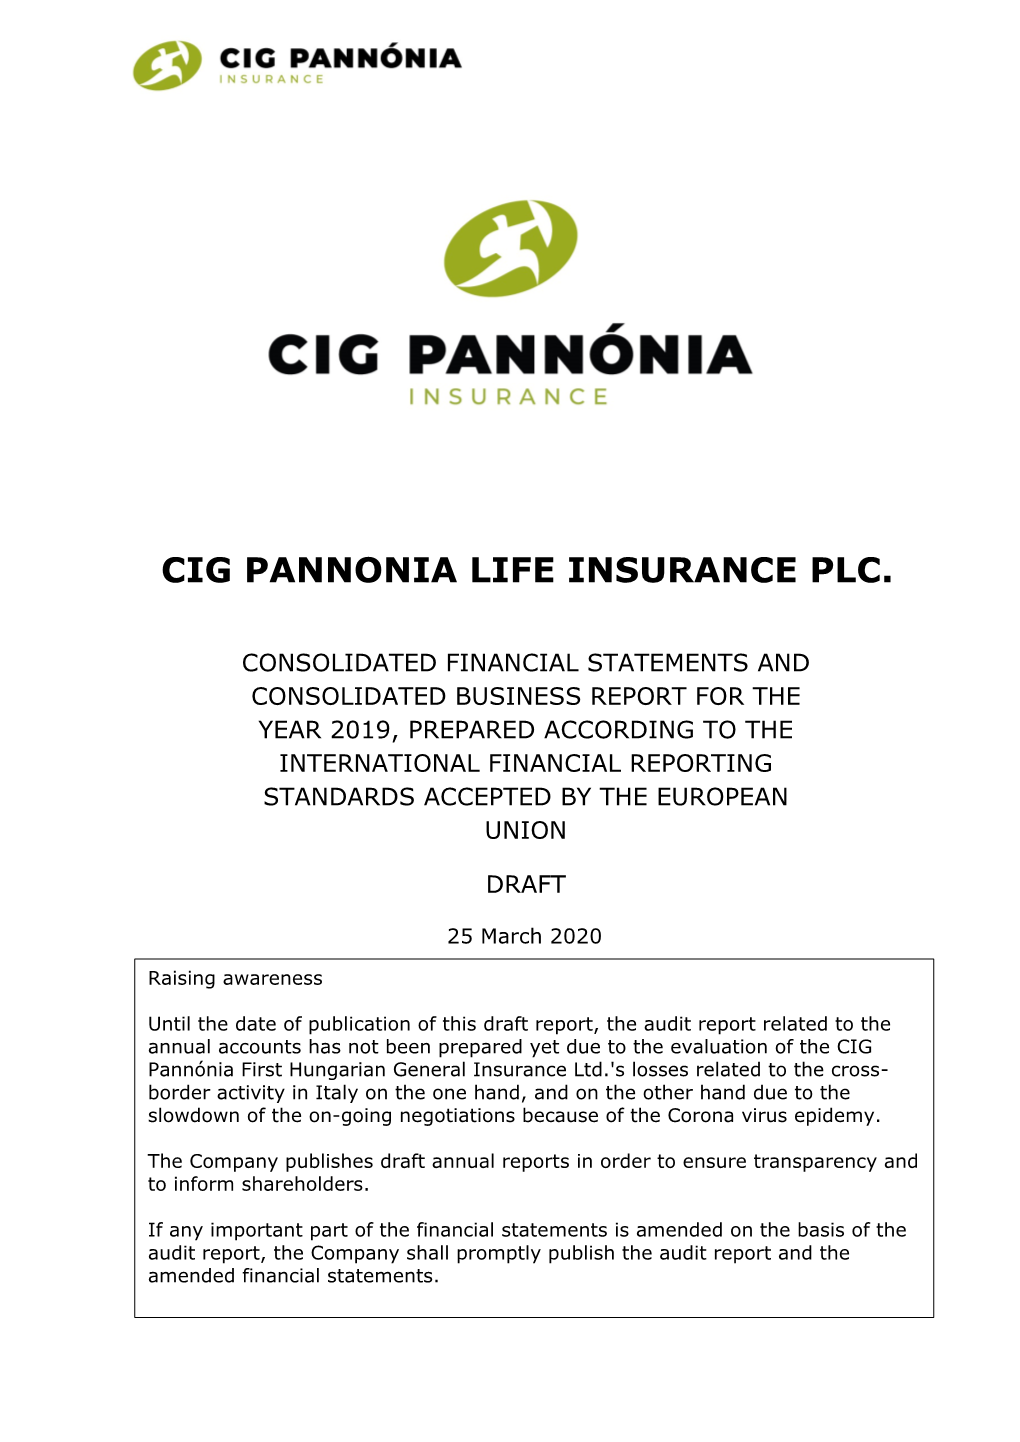 CIG Pannonia Life Insurance Private Company Limited by Shares